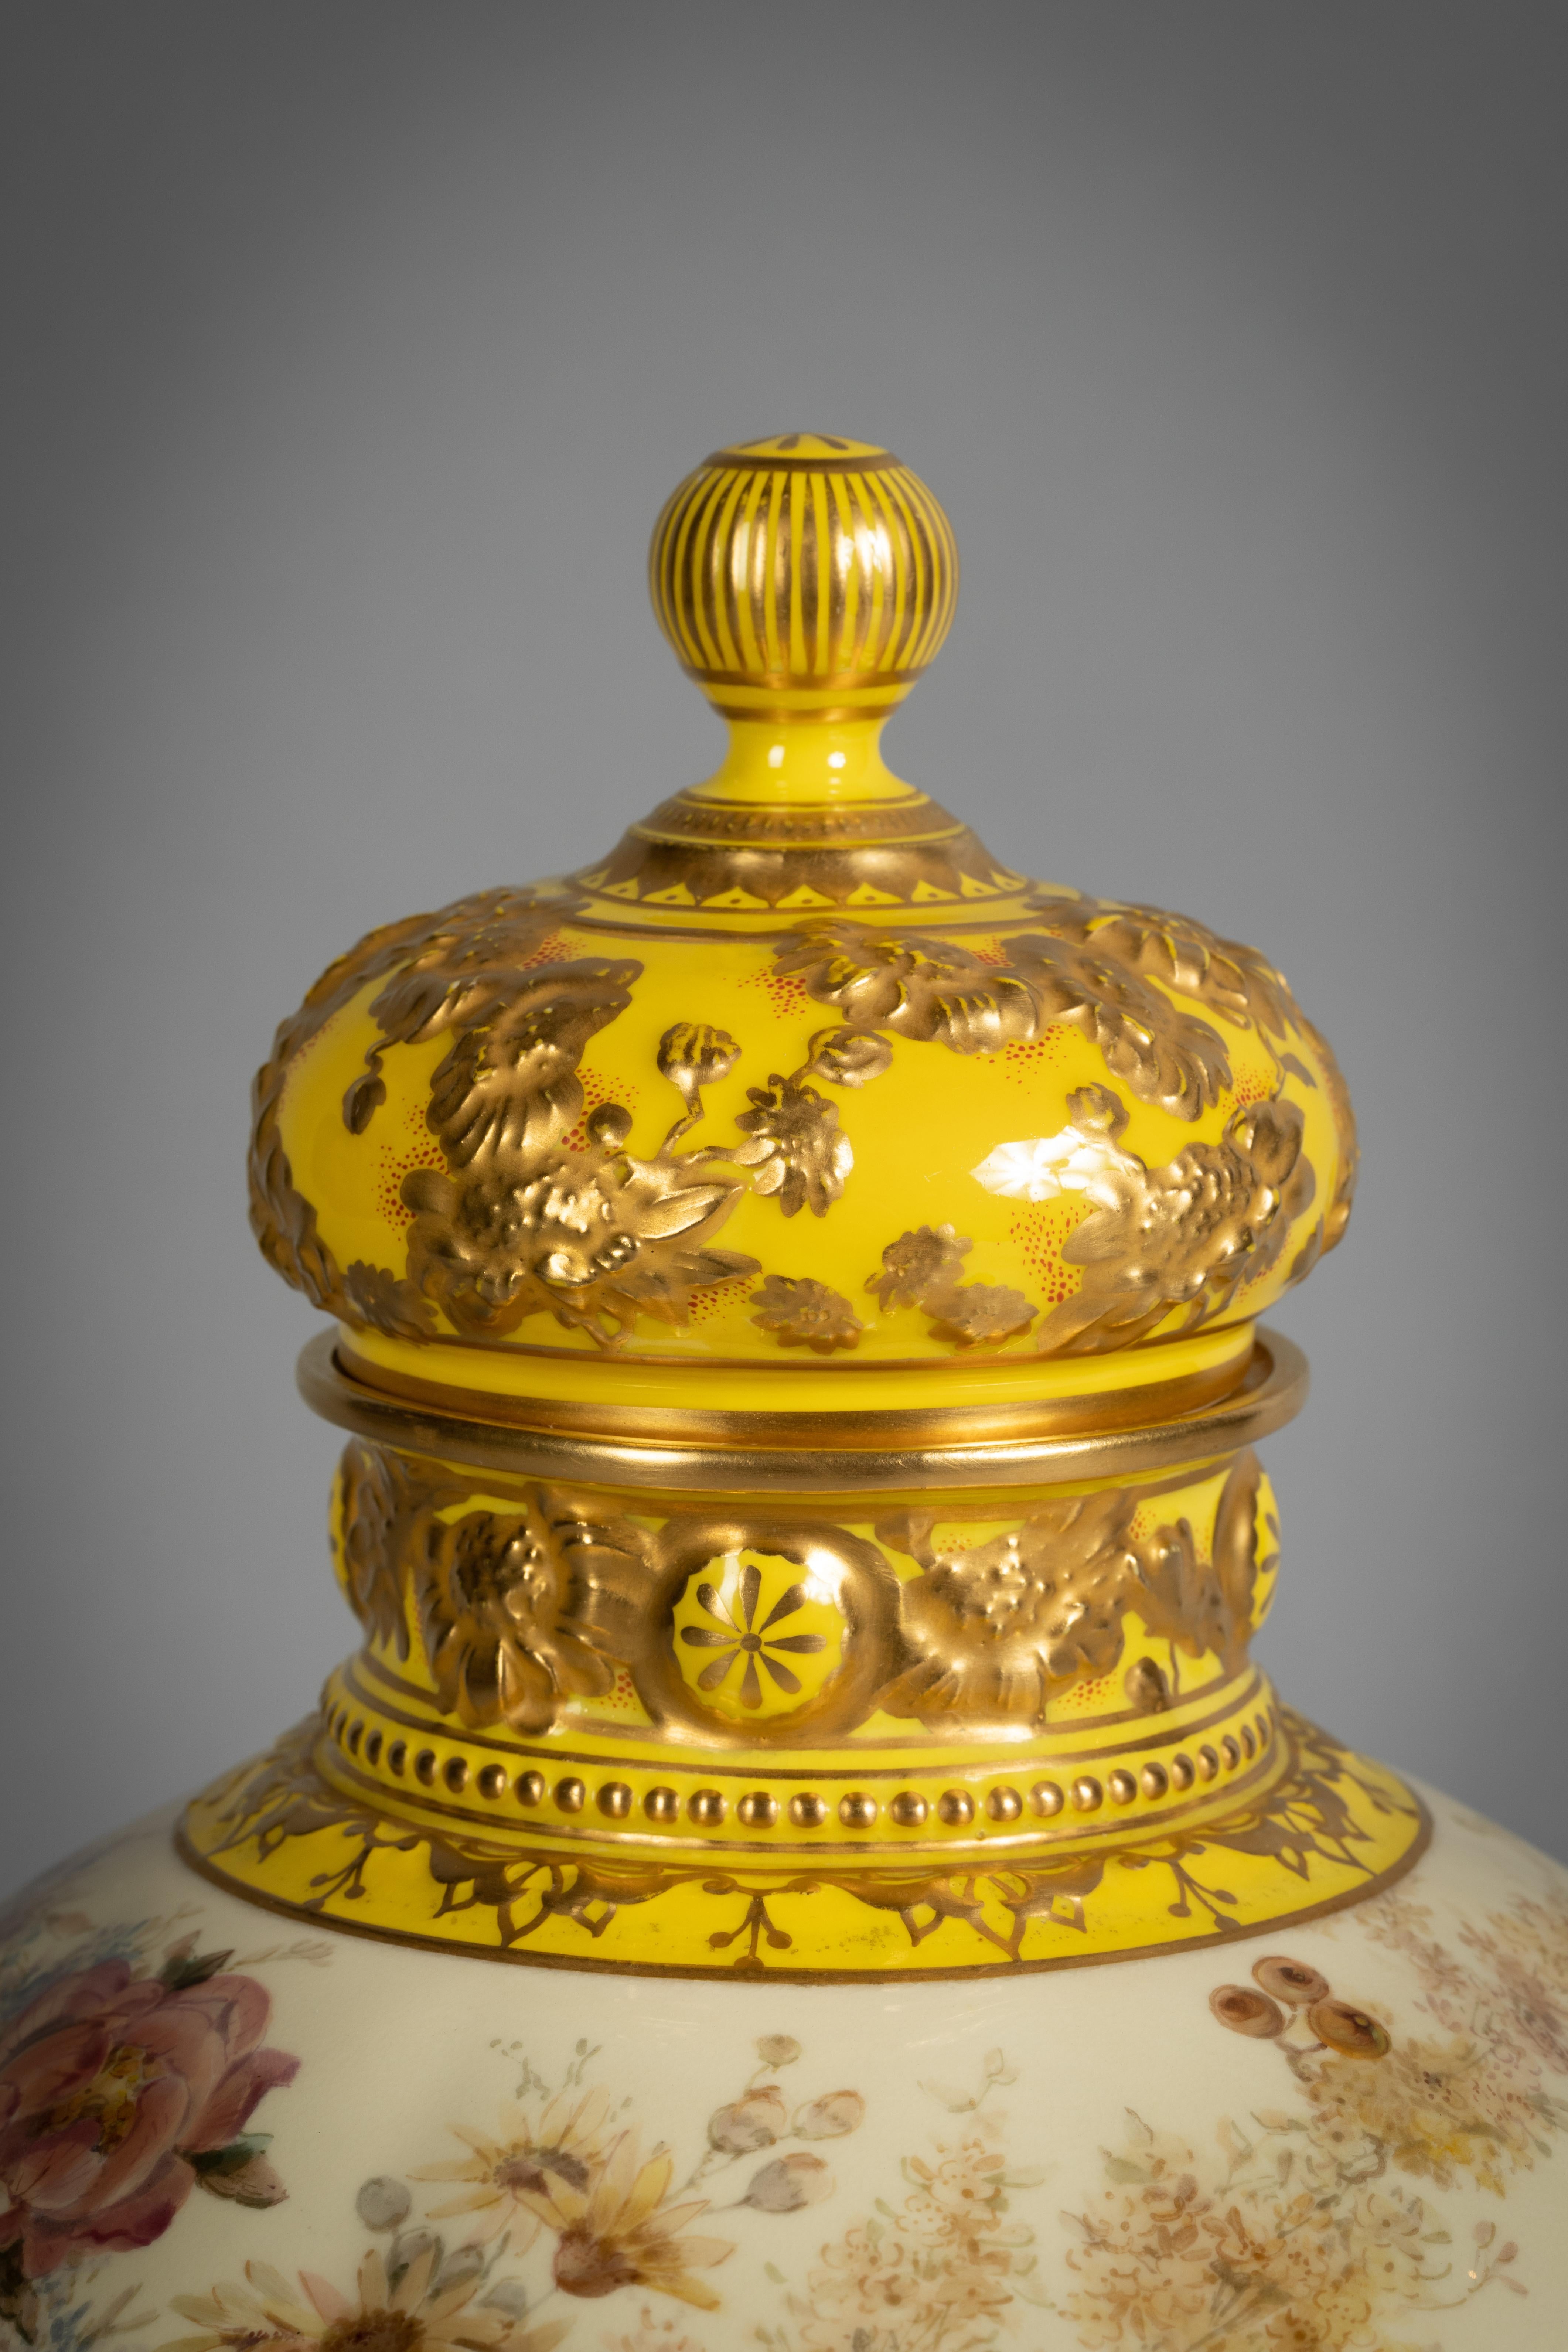 The lobed body delicately enameled with roses and berries, the shoulder and rim molded with gilt florets on a yellow ground, the cover similarly decorated.